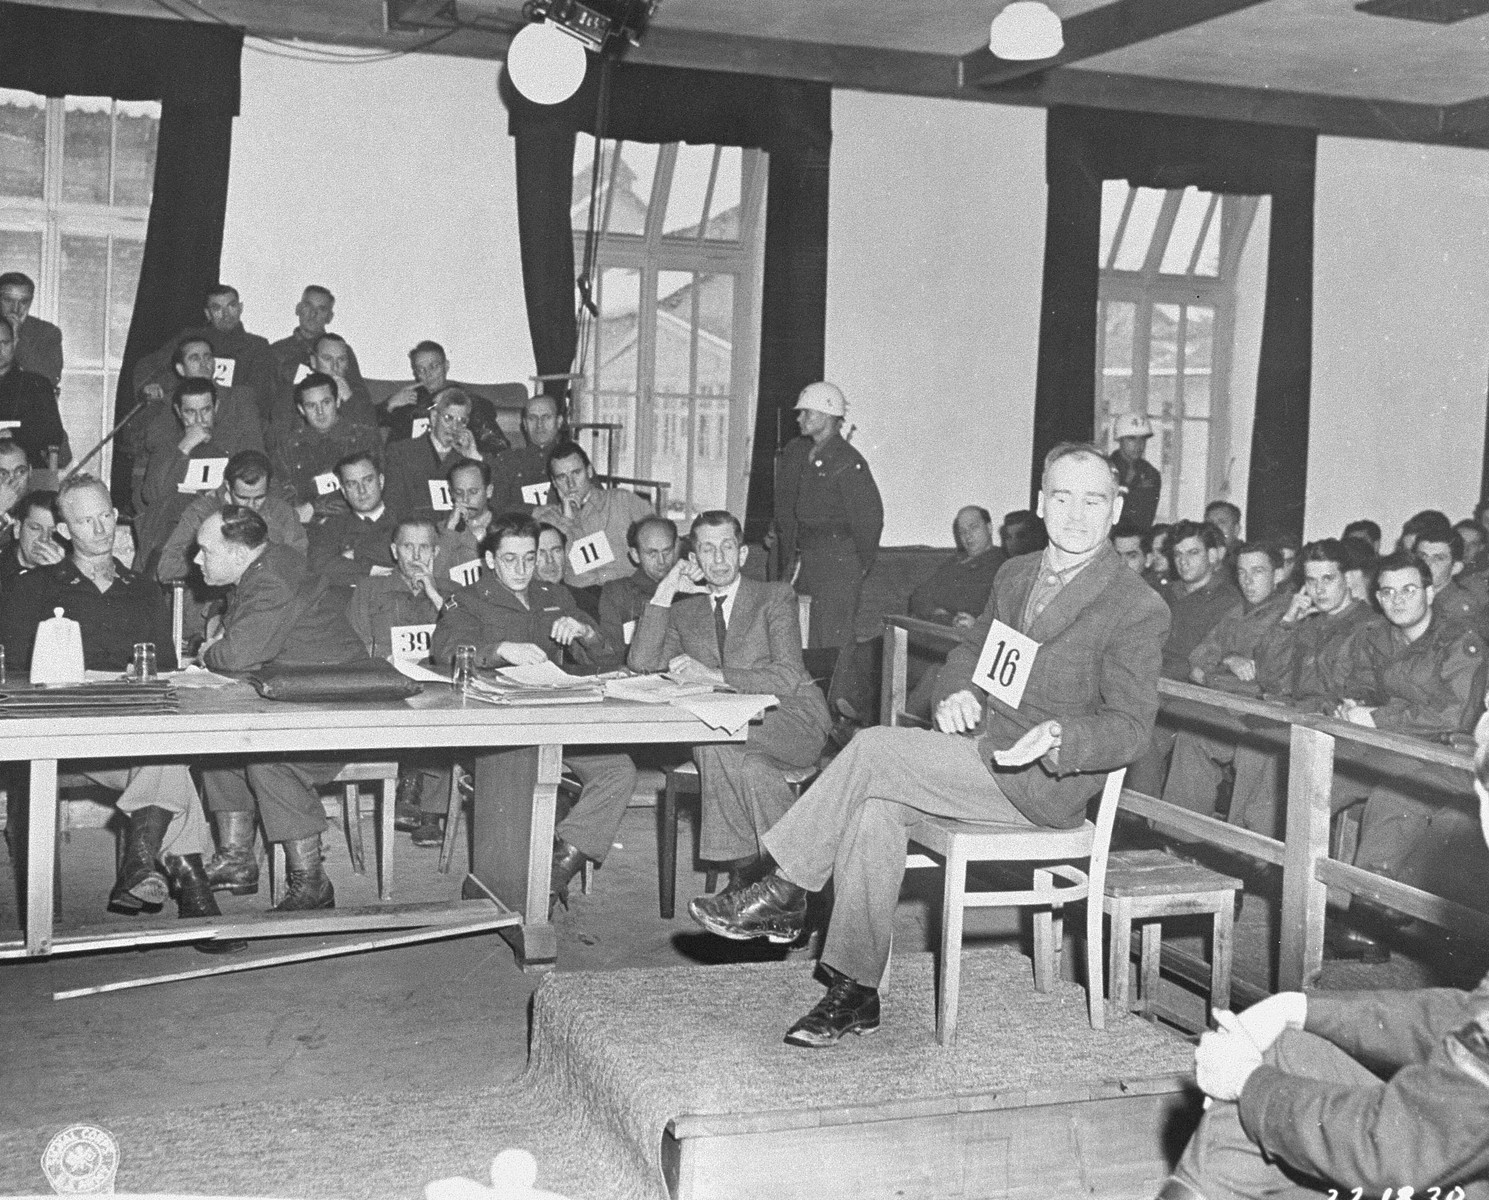 Defendant Christof Ludwig Knoll, a former political prisoner and block leader, testifies at the trial of former camp personnel and prisoners from Dachau.